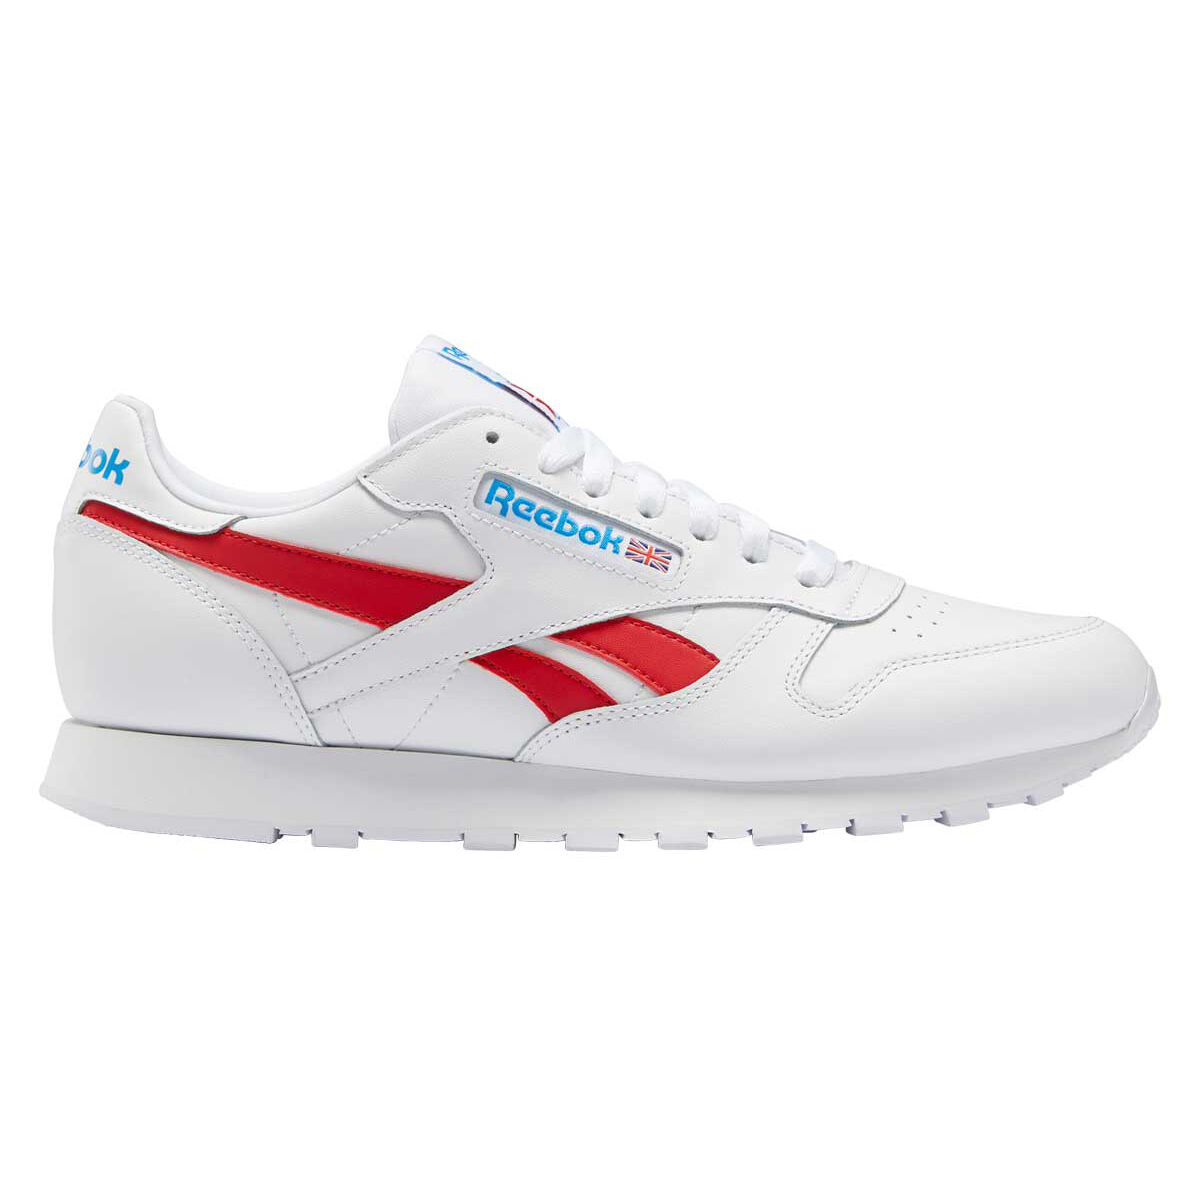 reebok classic casual shoes